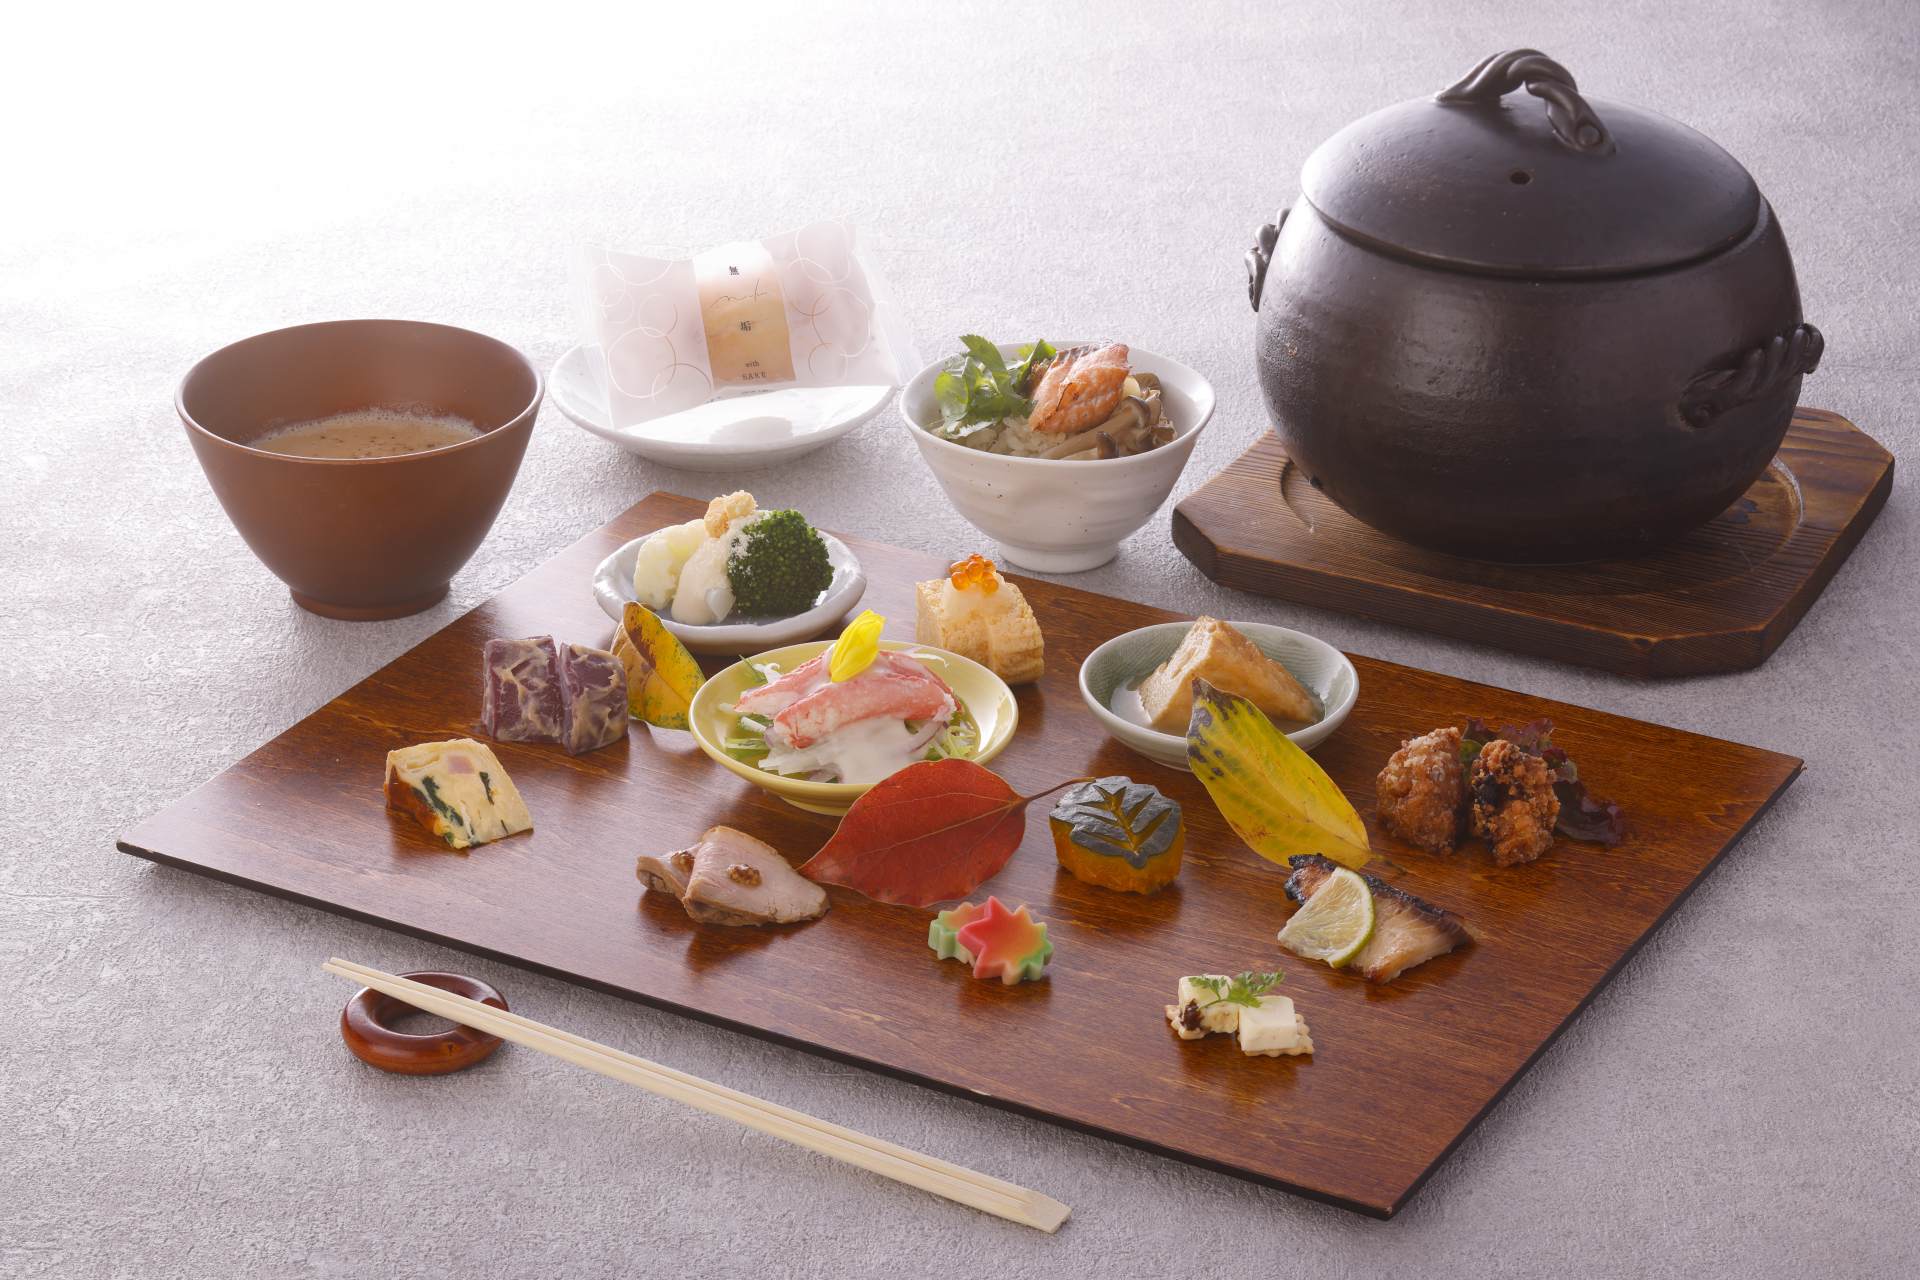 A monthly renewed lunch of small bites with sake lees side dishes and dessert for 2,500 yen